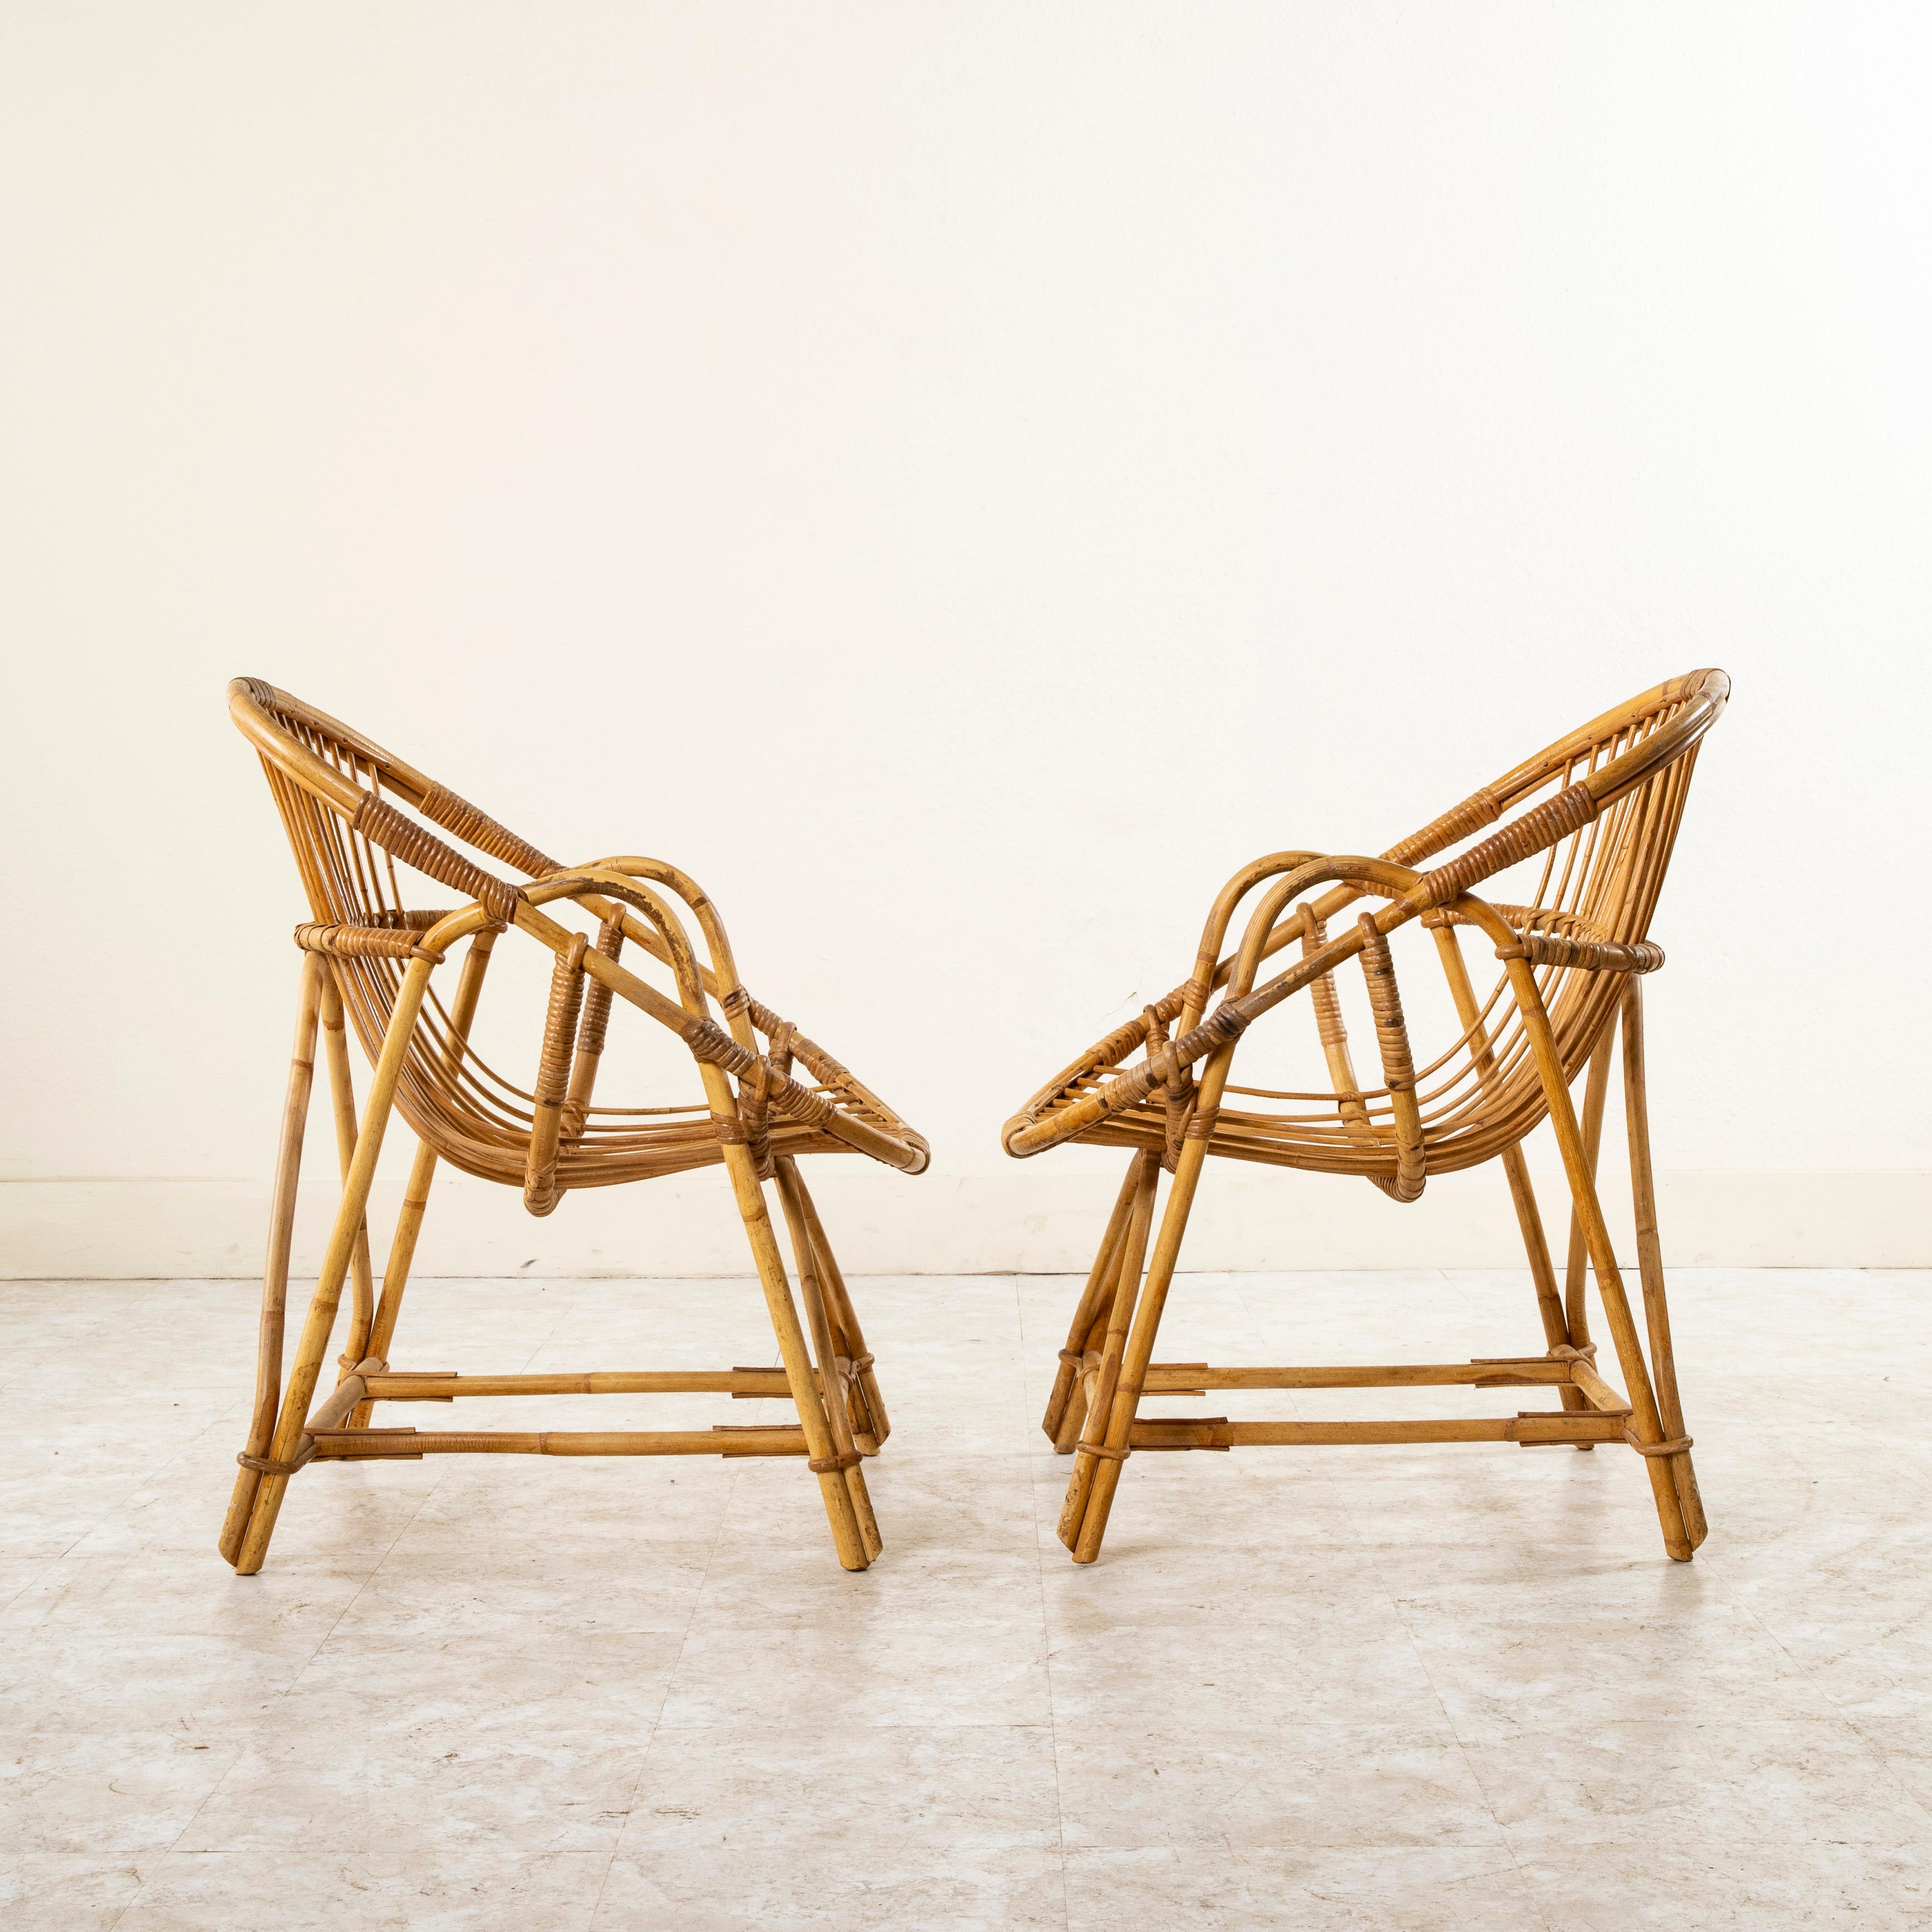 Pair of Mid-20th Century French Rattan Armchairs or Garden Chairs 2